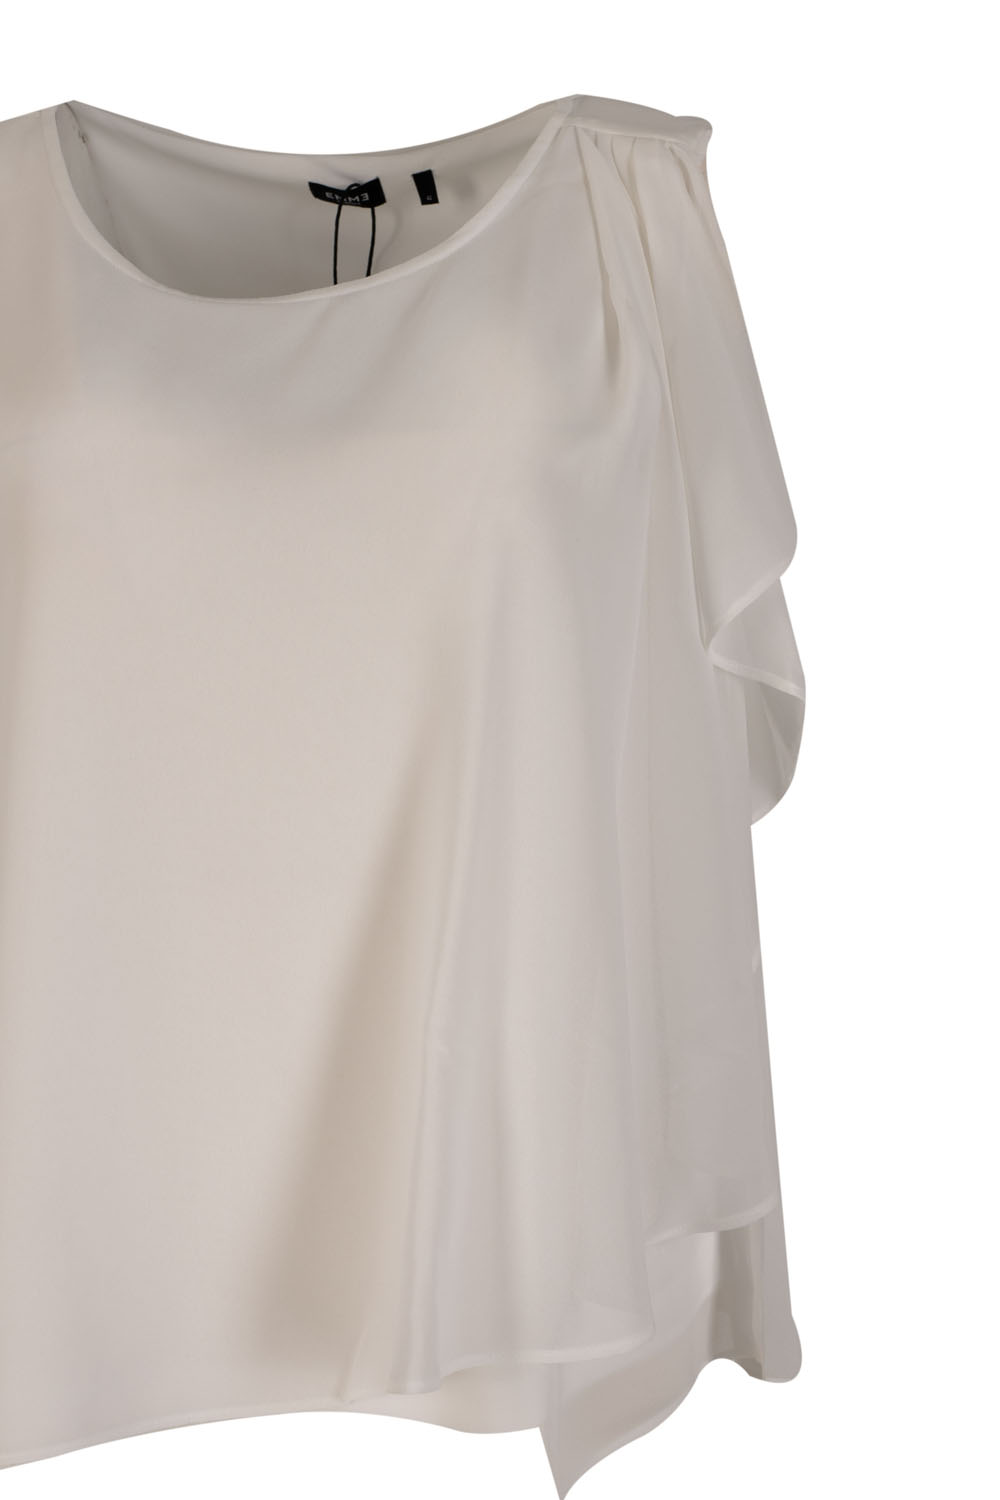 A-Line Blouse with Sheer Overlay and Side Flounce